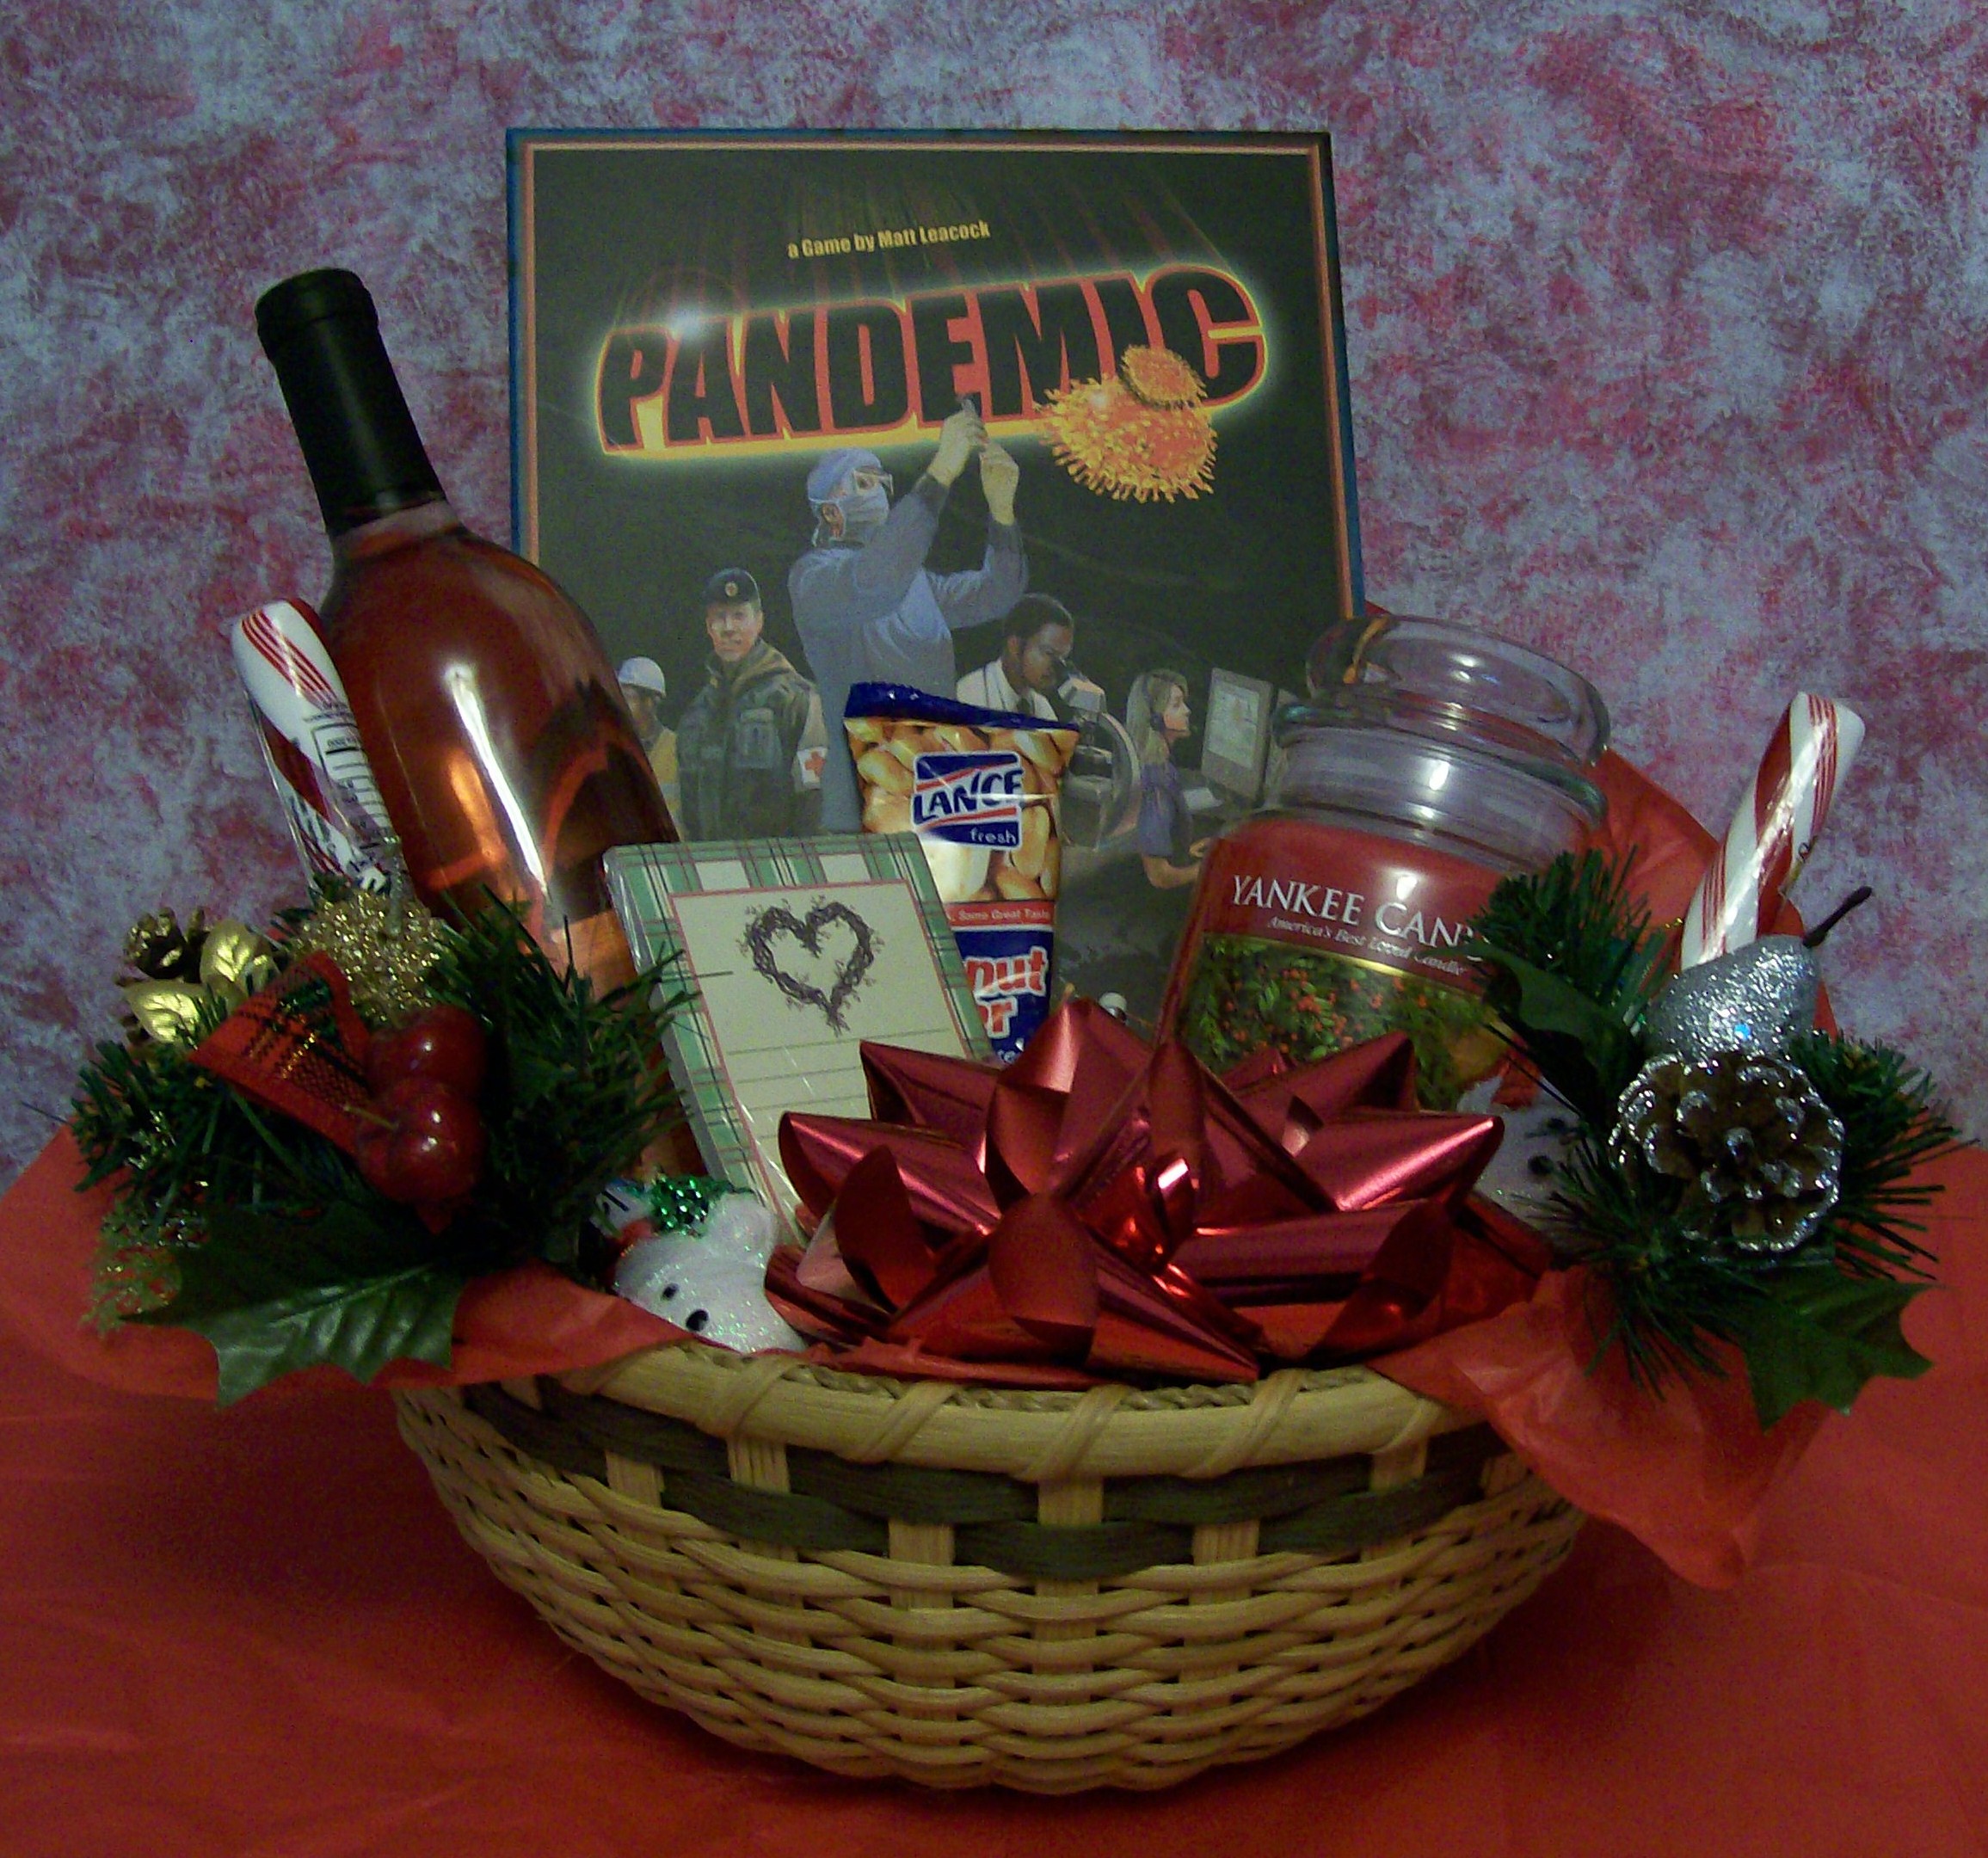 Ten Best Fun And Games Gift Baskets For Christmas All About Fun And Games